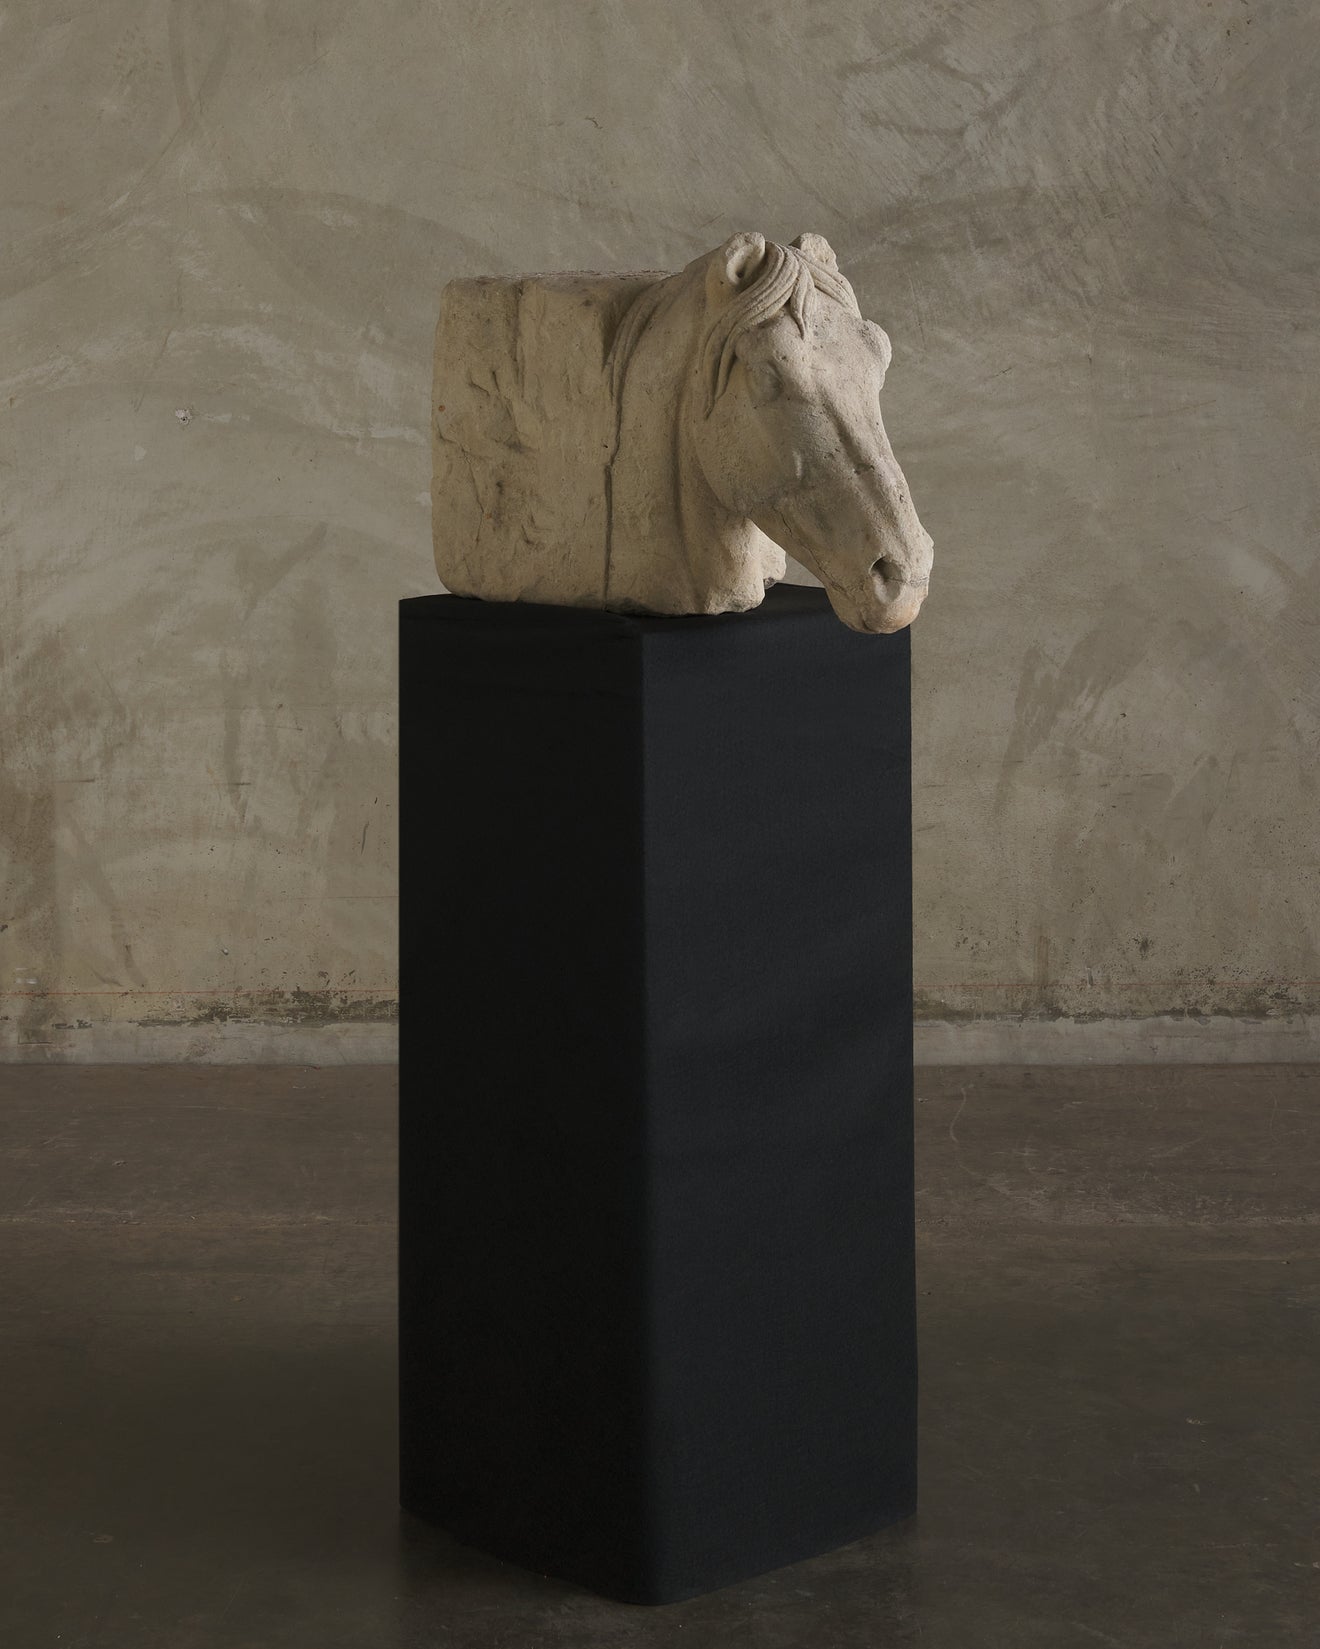 ITALIAN ARCHITECTURAL CARVED STONE HORSE